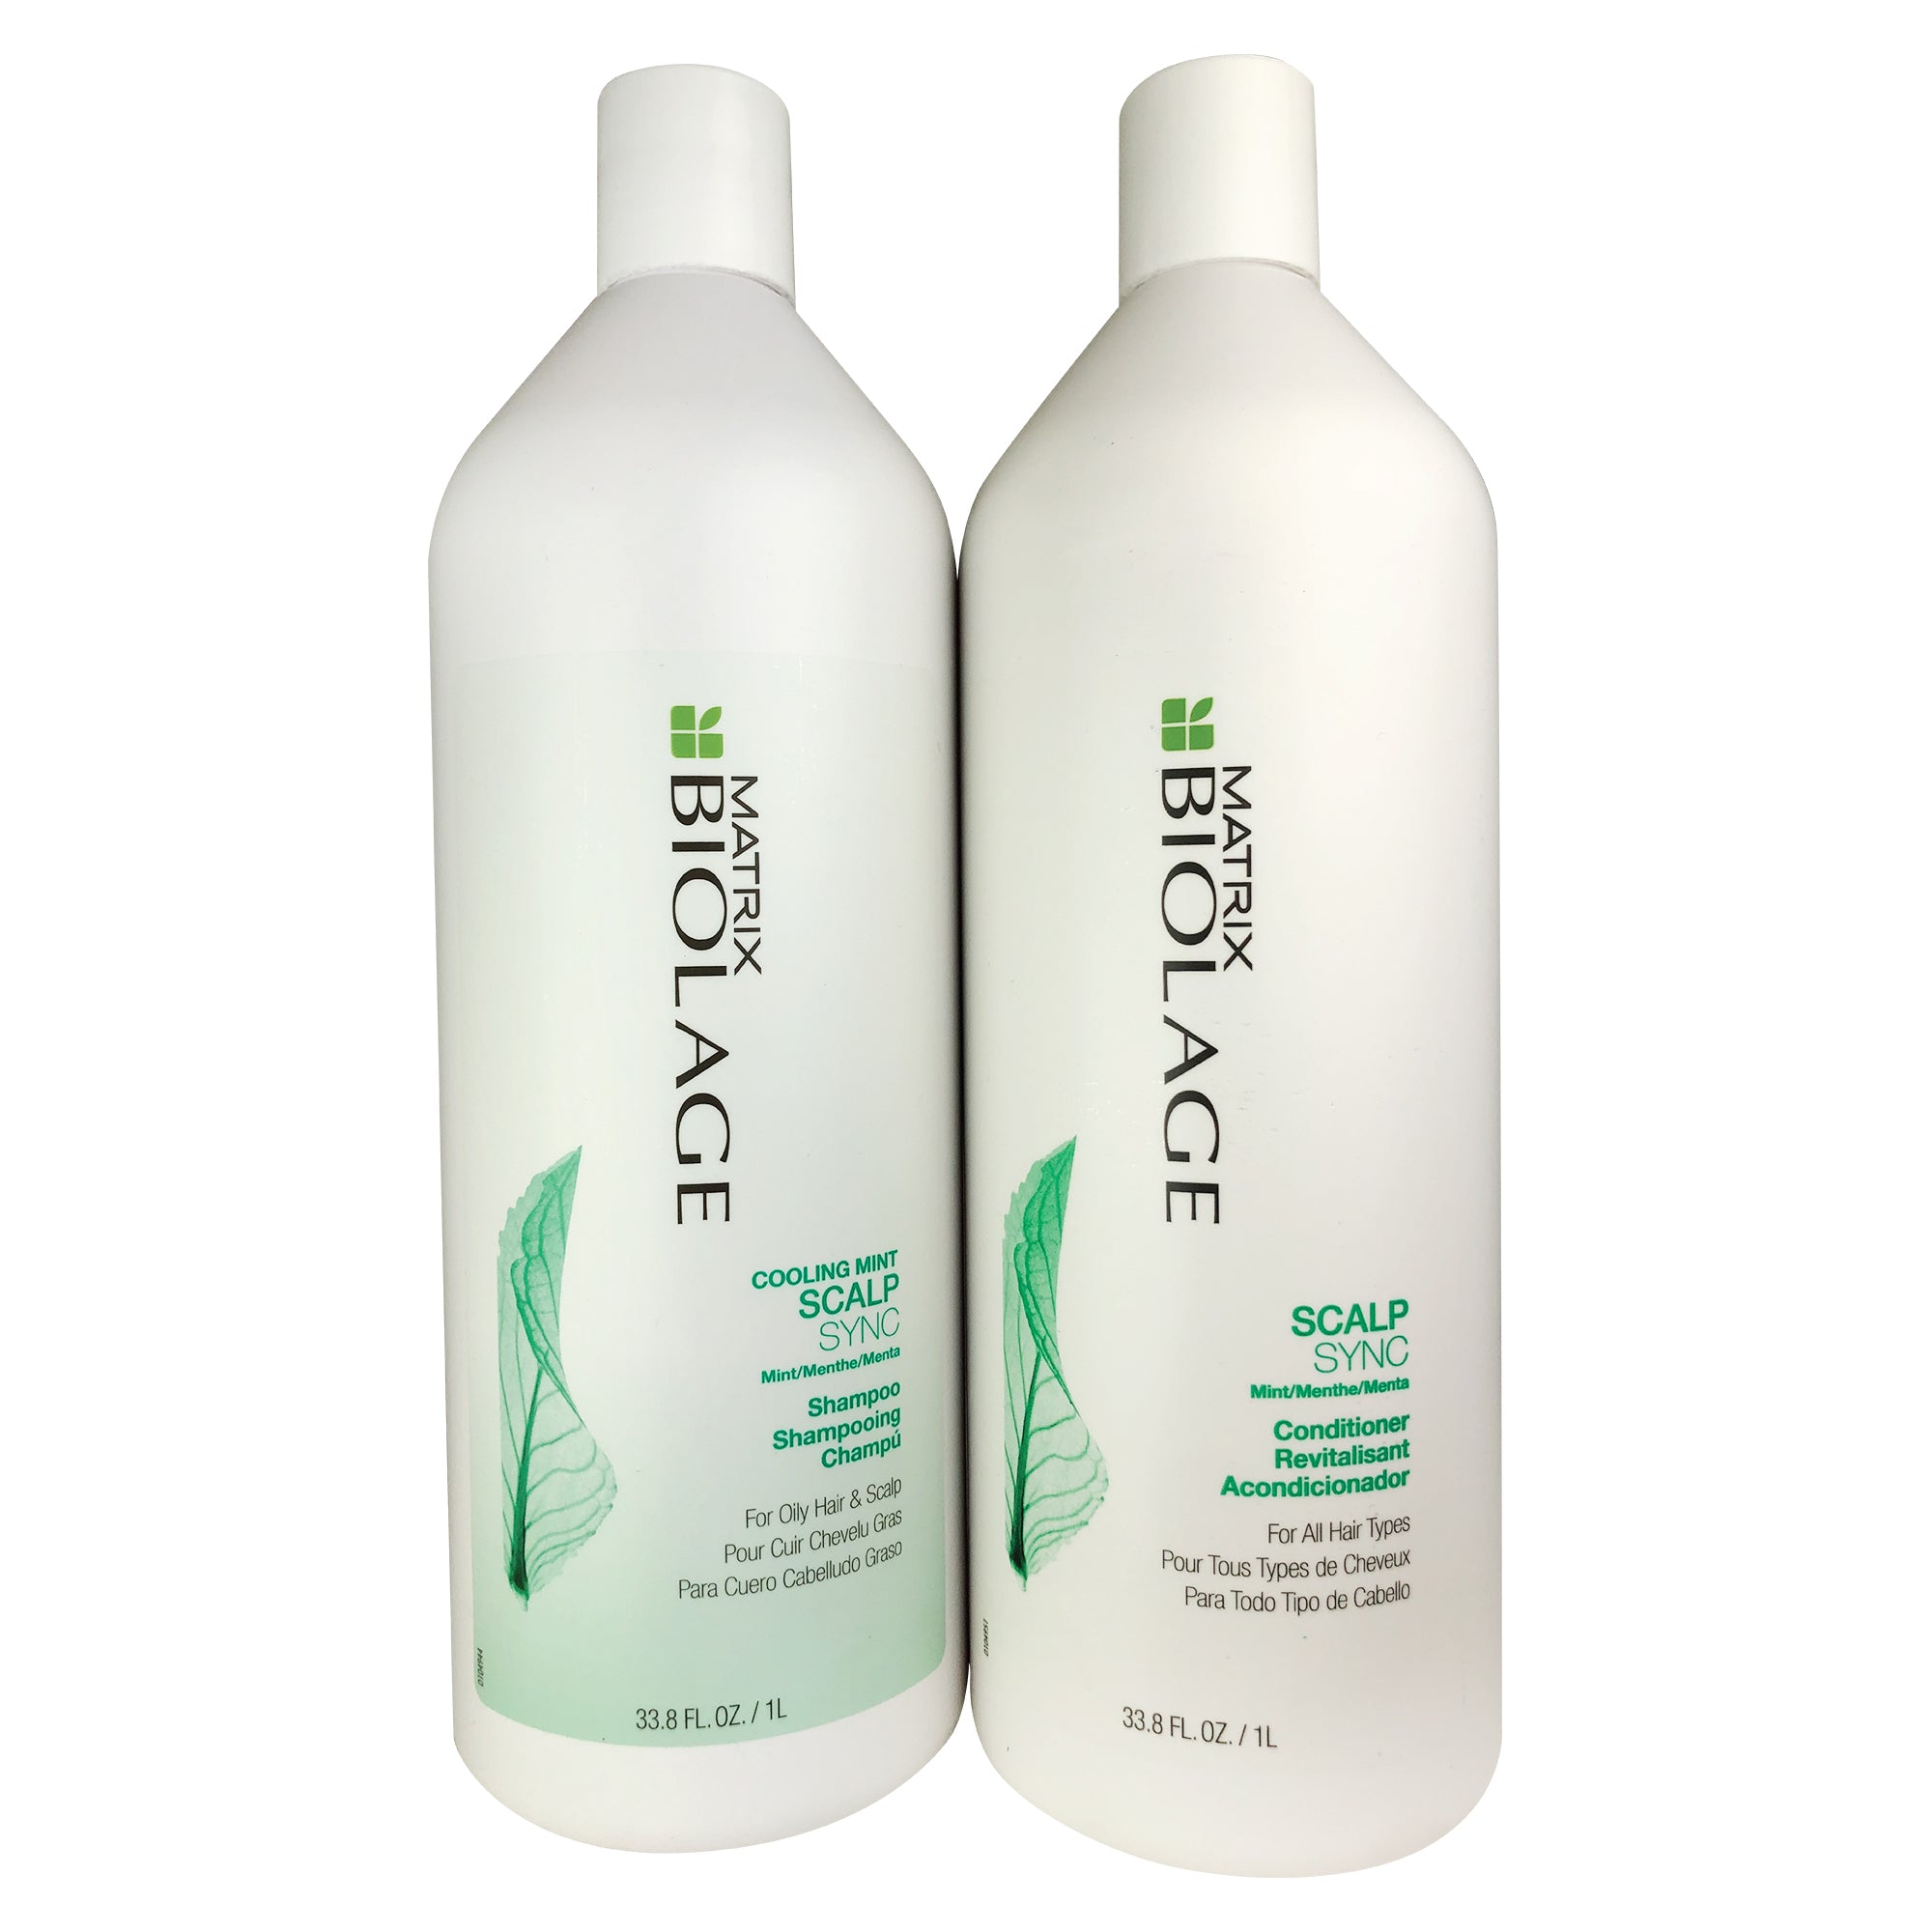 Matrix Biolage Scalp Sync Mint Shampoo And Conditioner Duo Liter 33.8 oz For all Hair Types